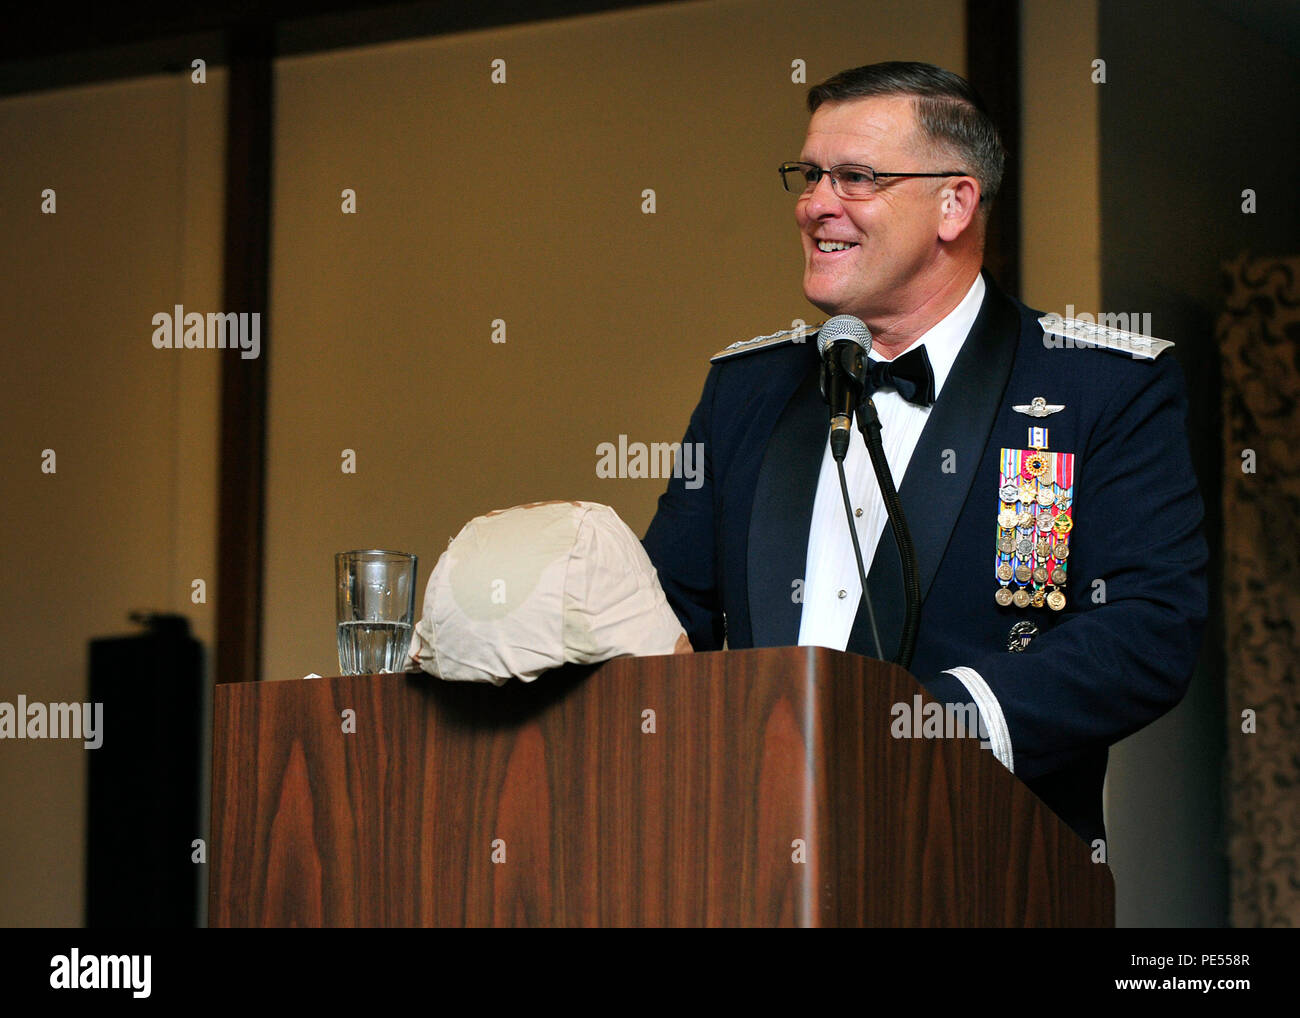 Gen. Frank Gorenc, U.S. Air Forces in Europe and Air Forces Africa commander, speaks at the Air Force Ball, Sept. 12, 2015, at Ramstein Air Base, Germany. Gorenc spoke about the Air Force’s accomplishments throughout its 68 years as well as the importance of being the world’s greatest Air Force. (U.S. Air Force photo/Airman 1st Class Larissa Greatwood) Stock Photo